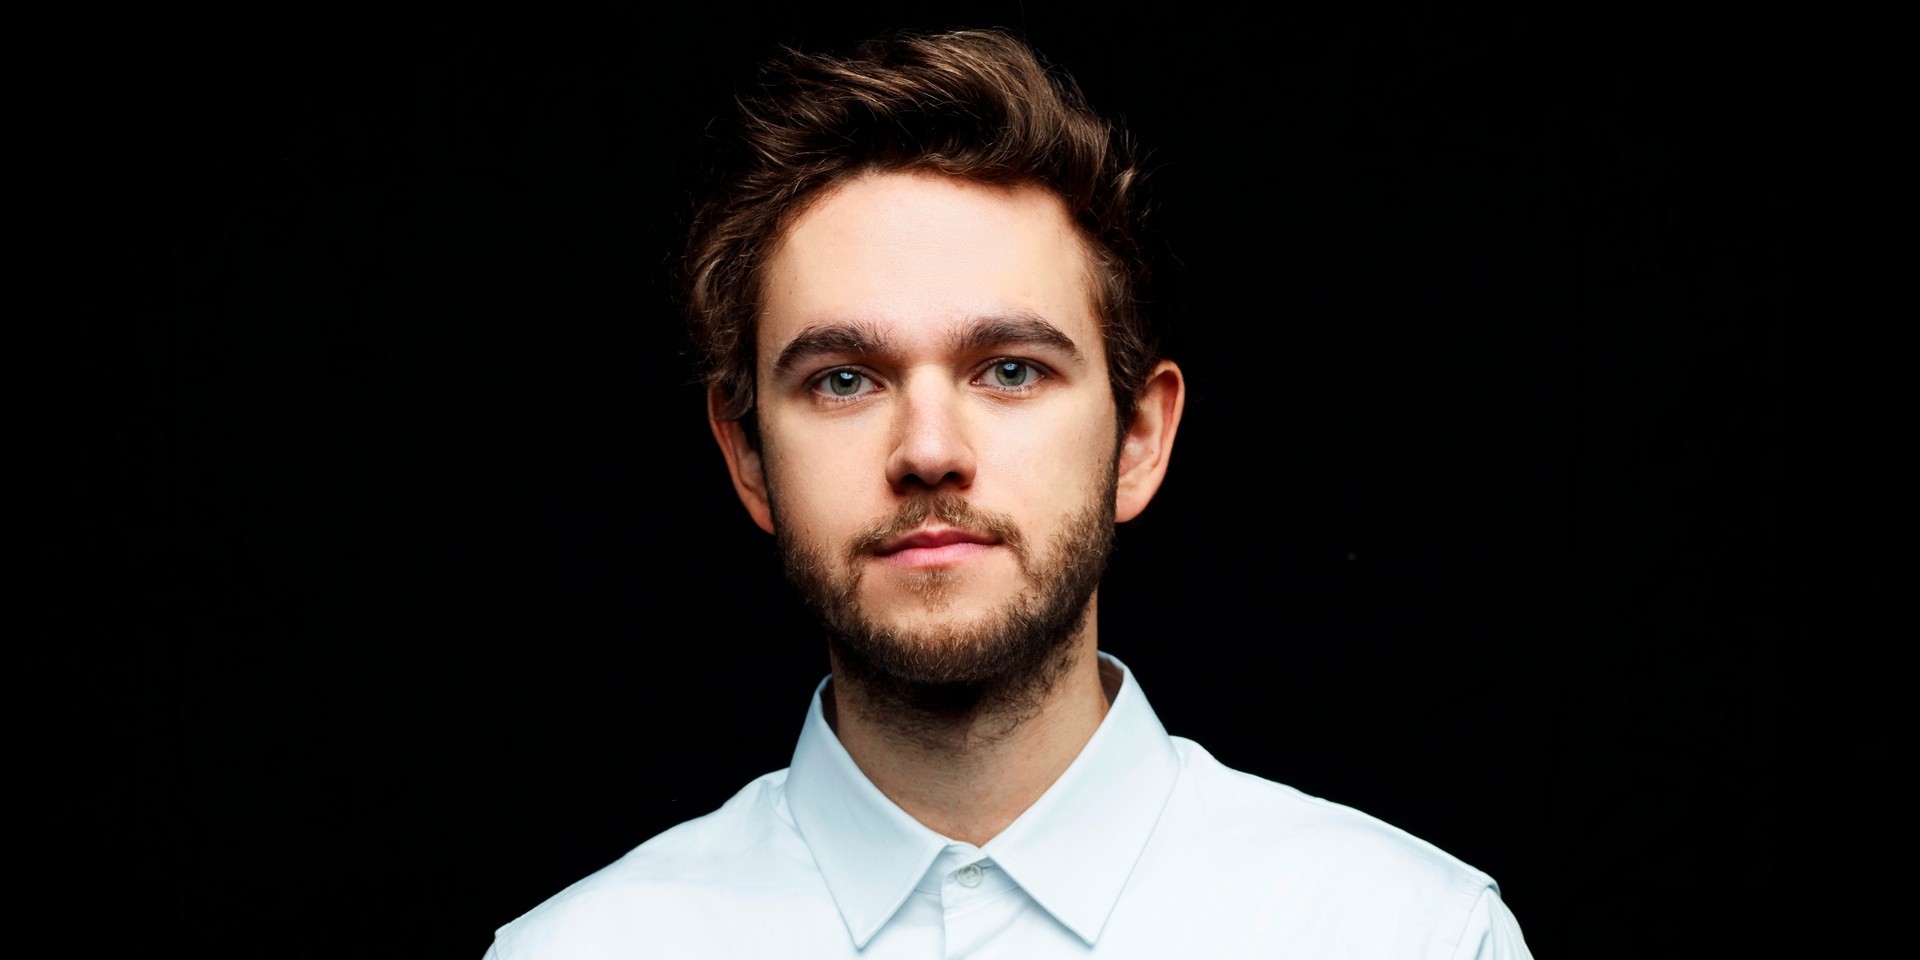 Zedd pre-sale tickets for Singapore show now sold out